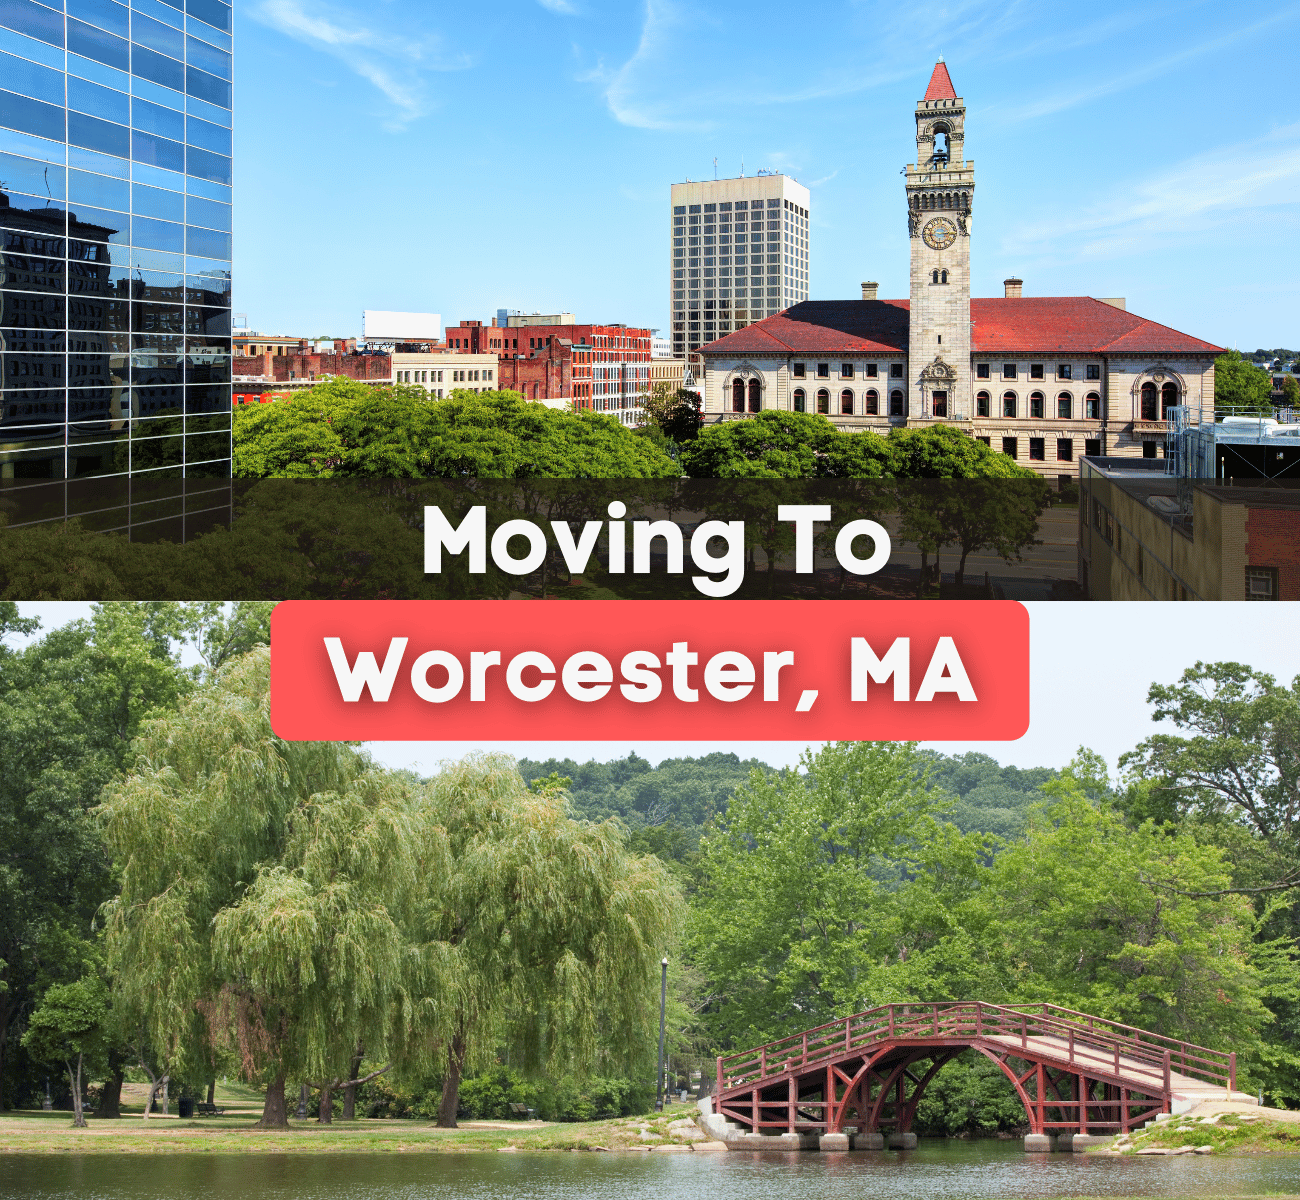 moving to Worcester, MA - Elm Park and city of Worcester 